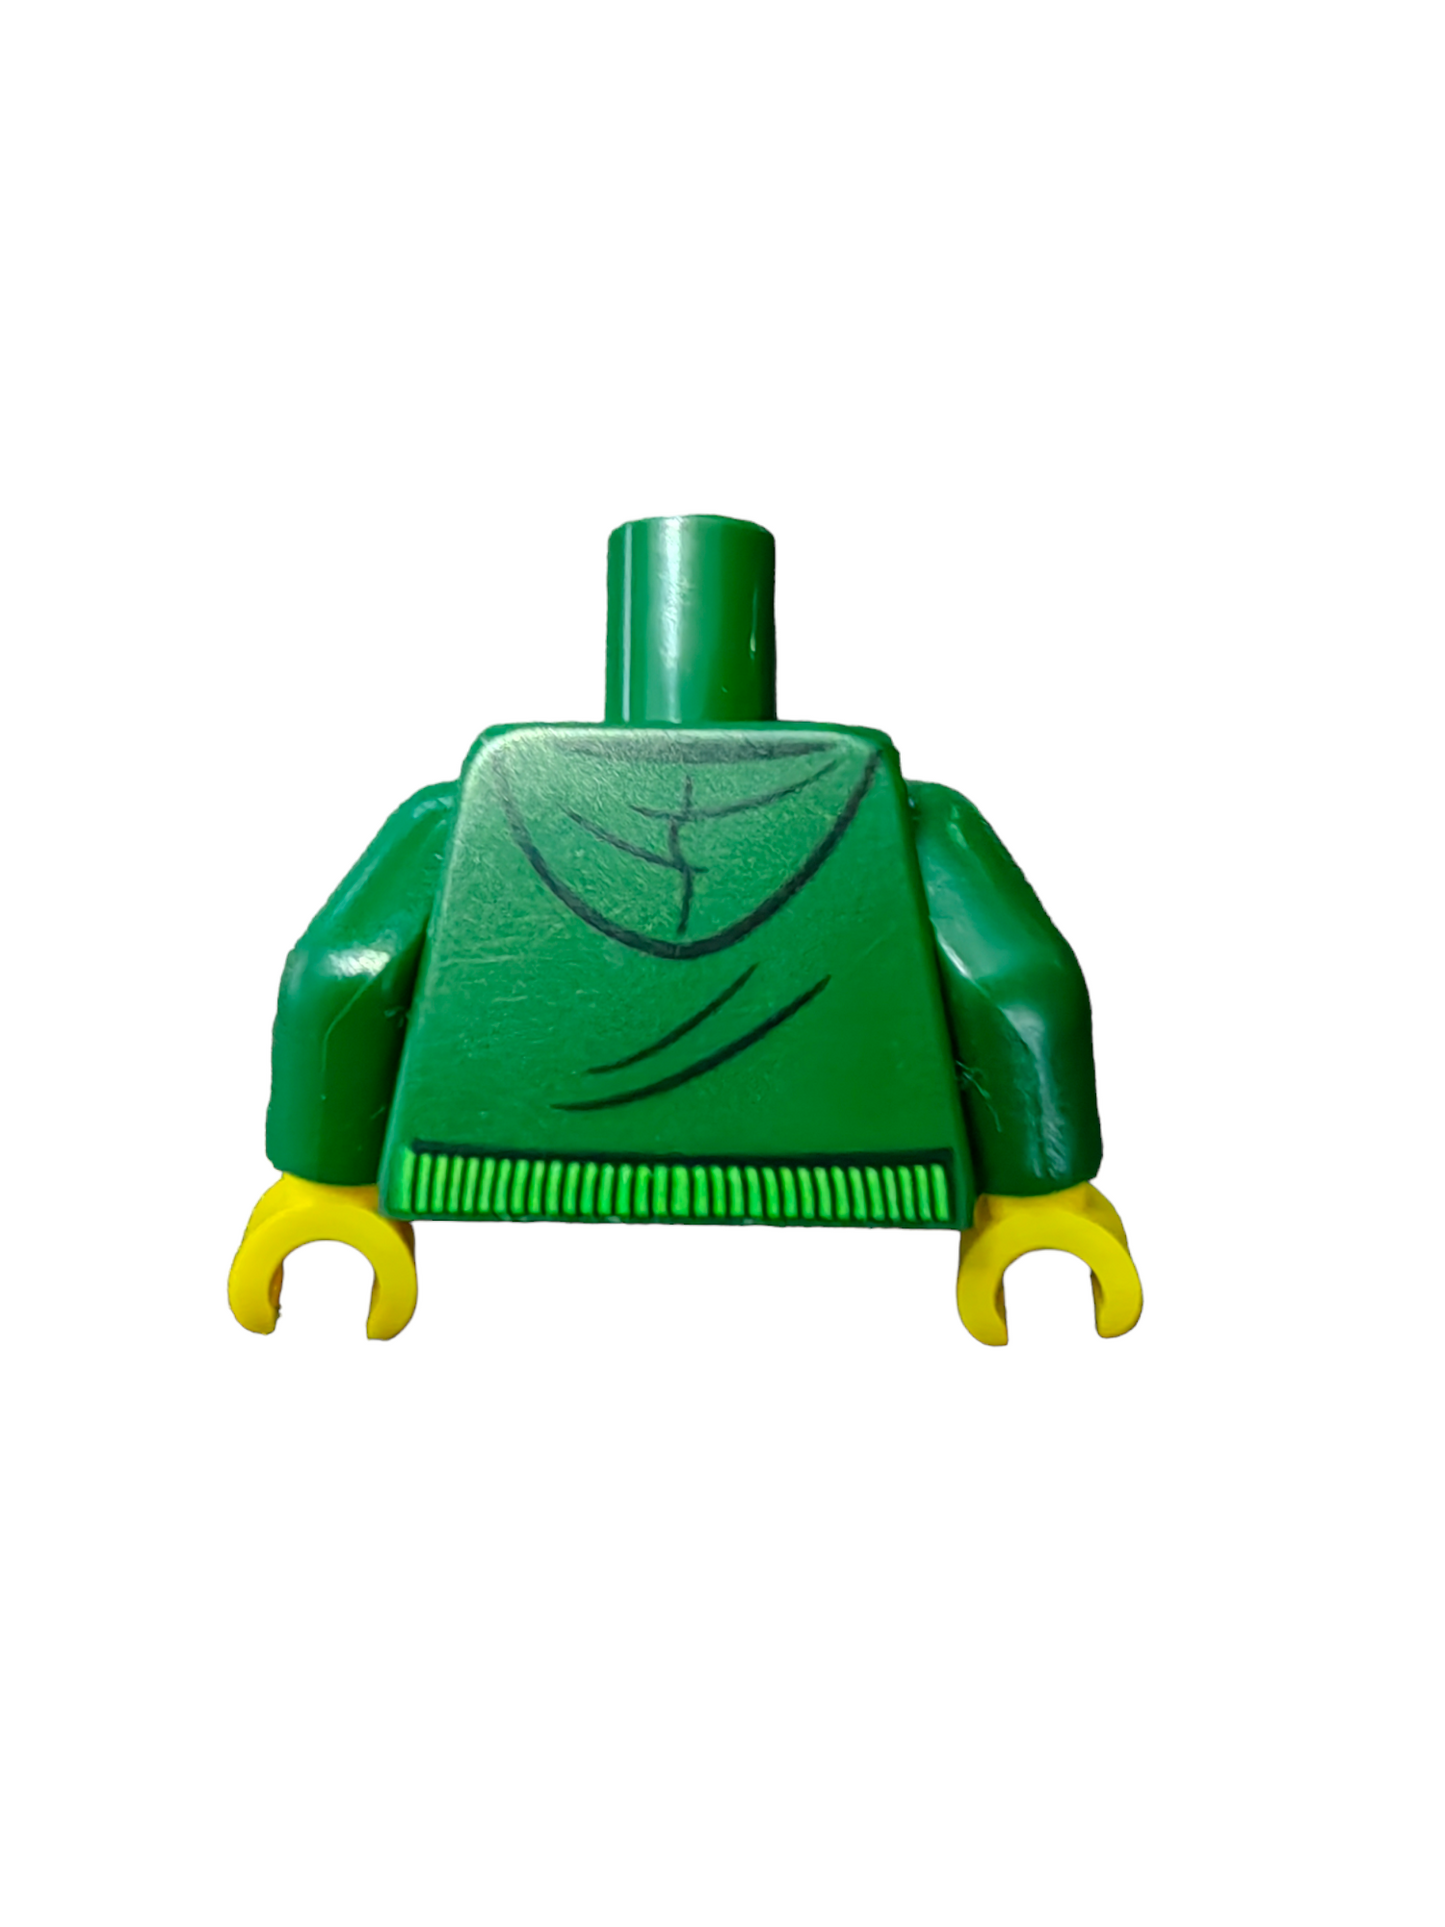 LEGO Torso, Hoodie with Bright Green Drawstrings and Black Shirt with Equalizer Bars Pattern- UB1144